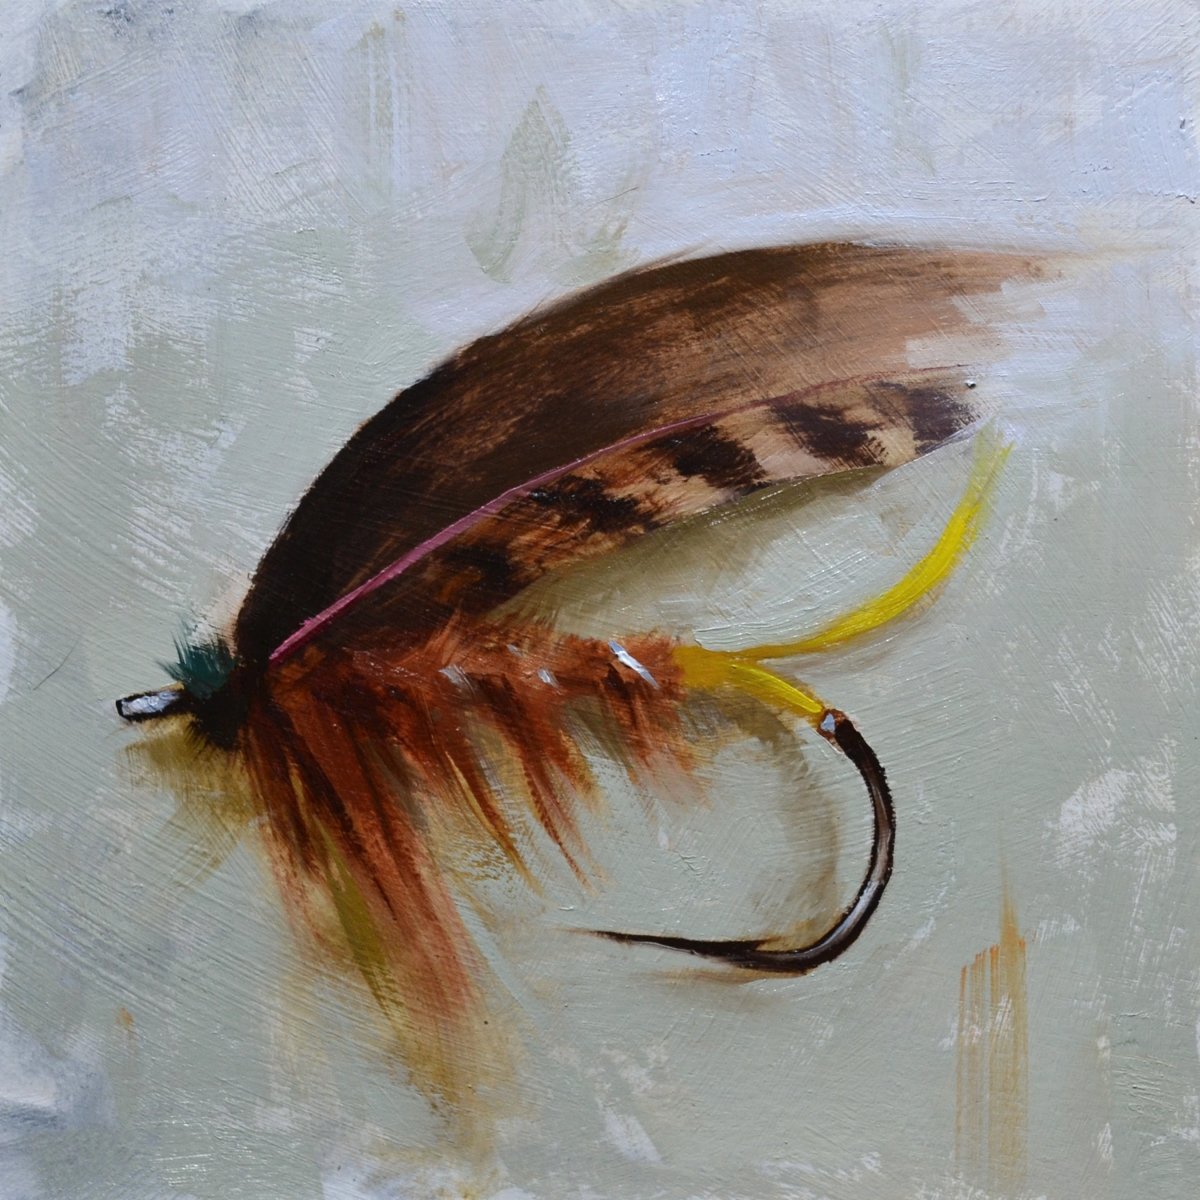 Blacker Brown Fly by Marc Anderson at LePrince Galleries